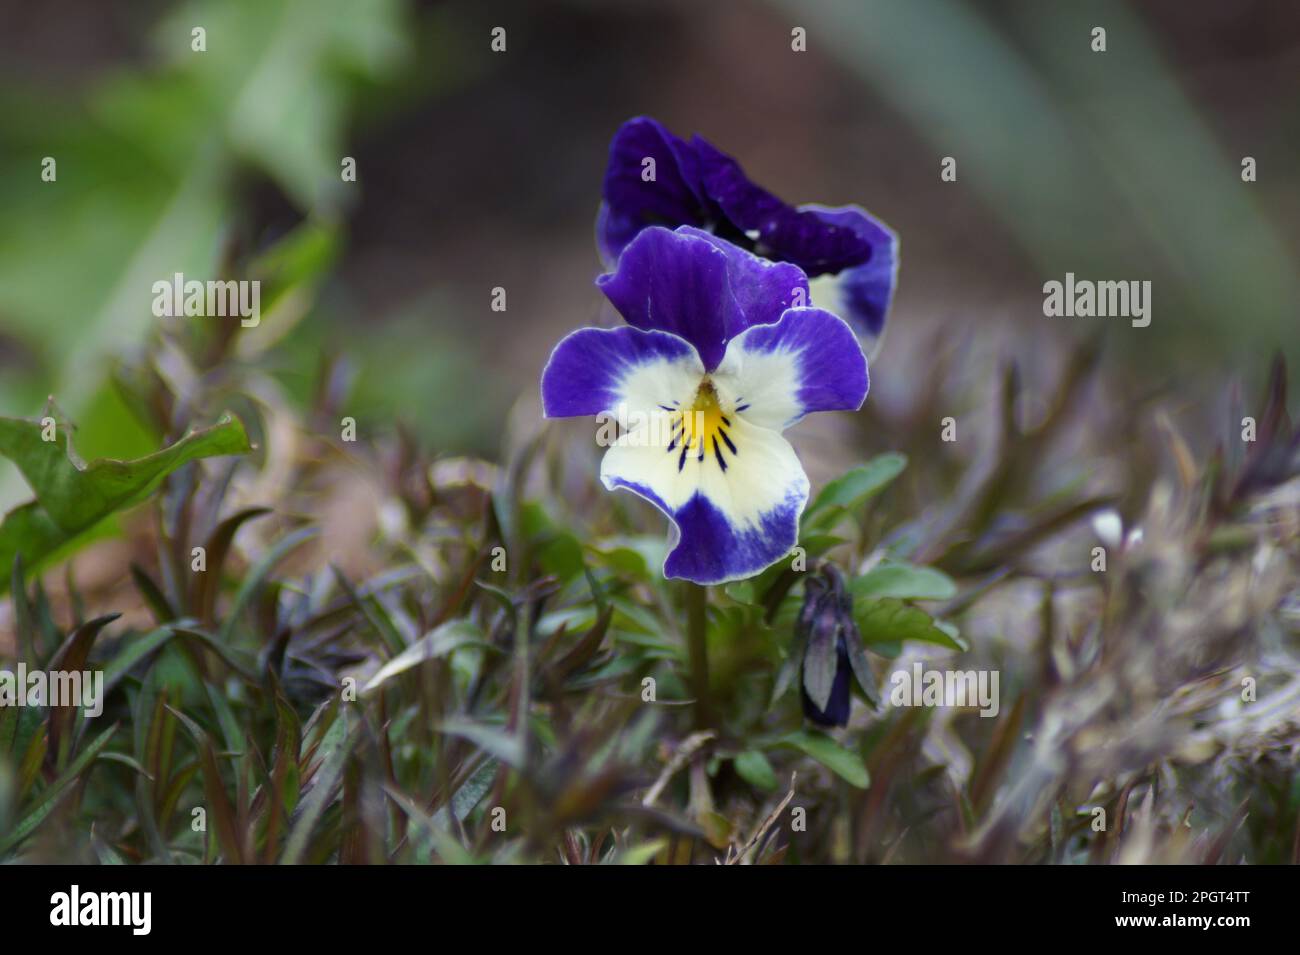 spring blooming pansies in the garden Stock Photo